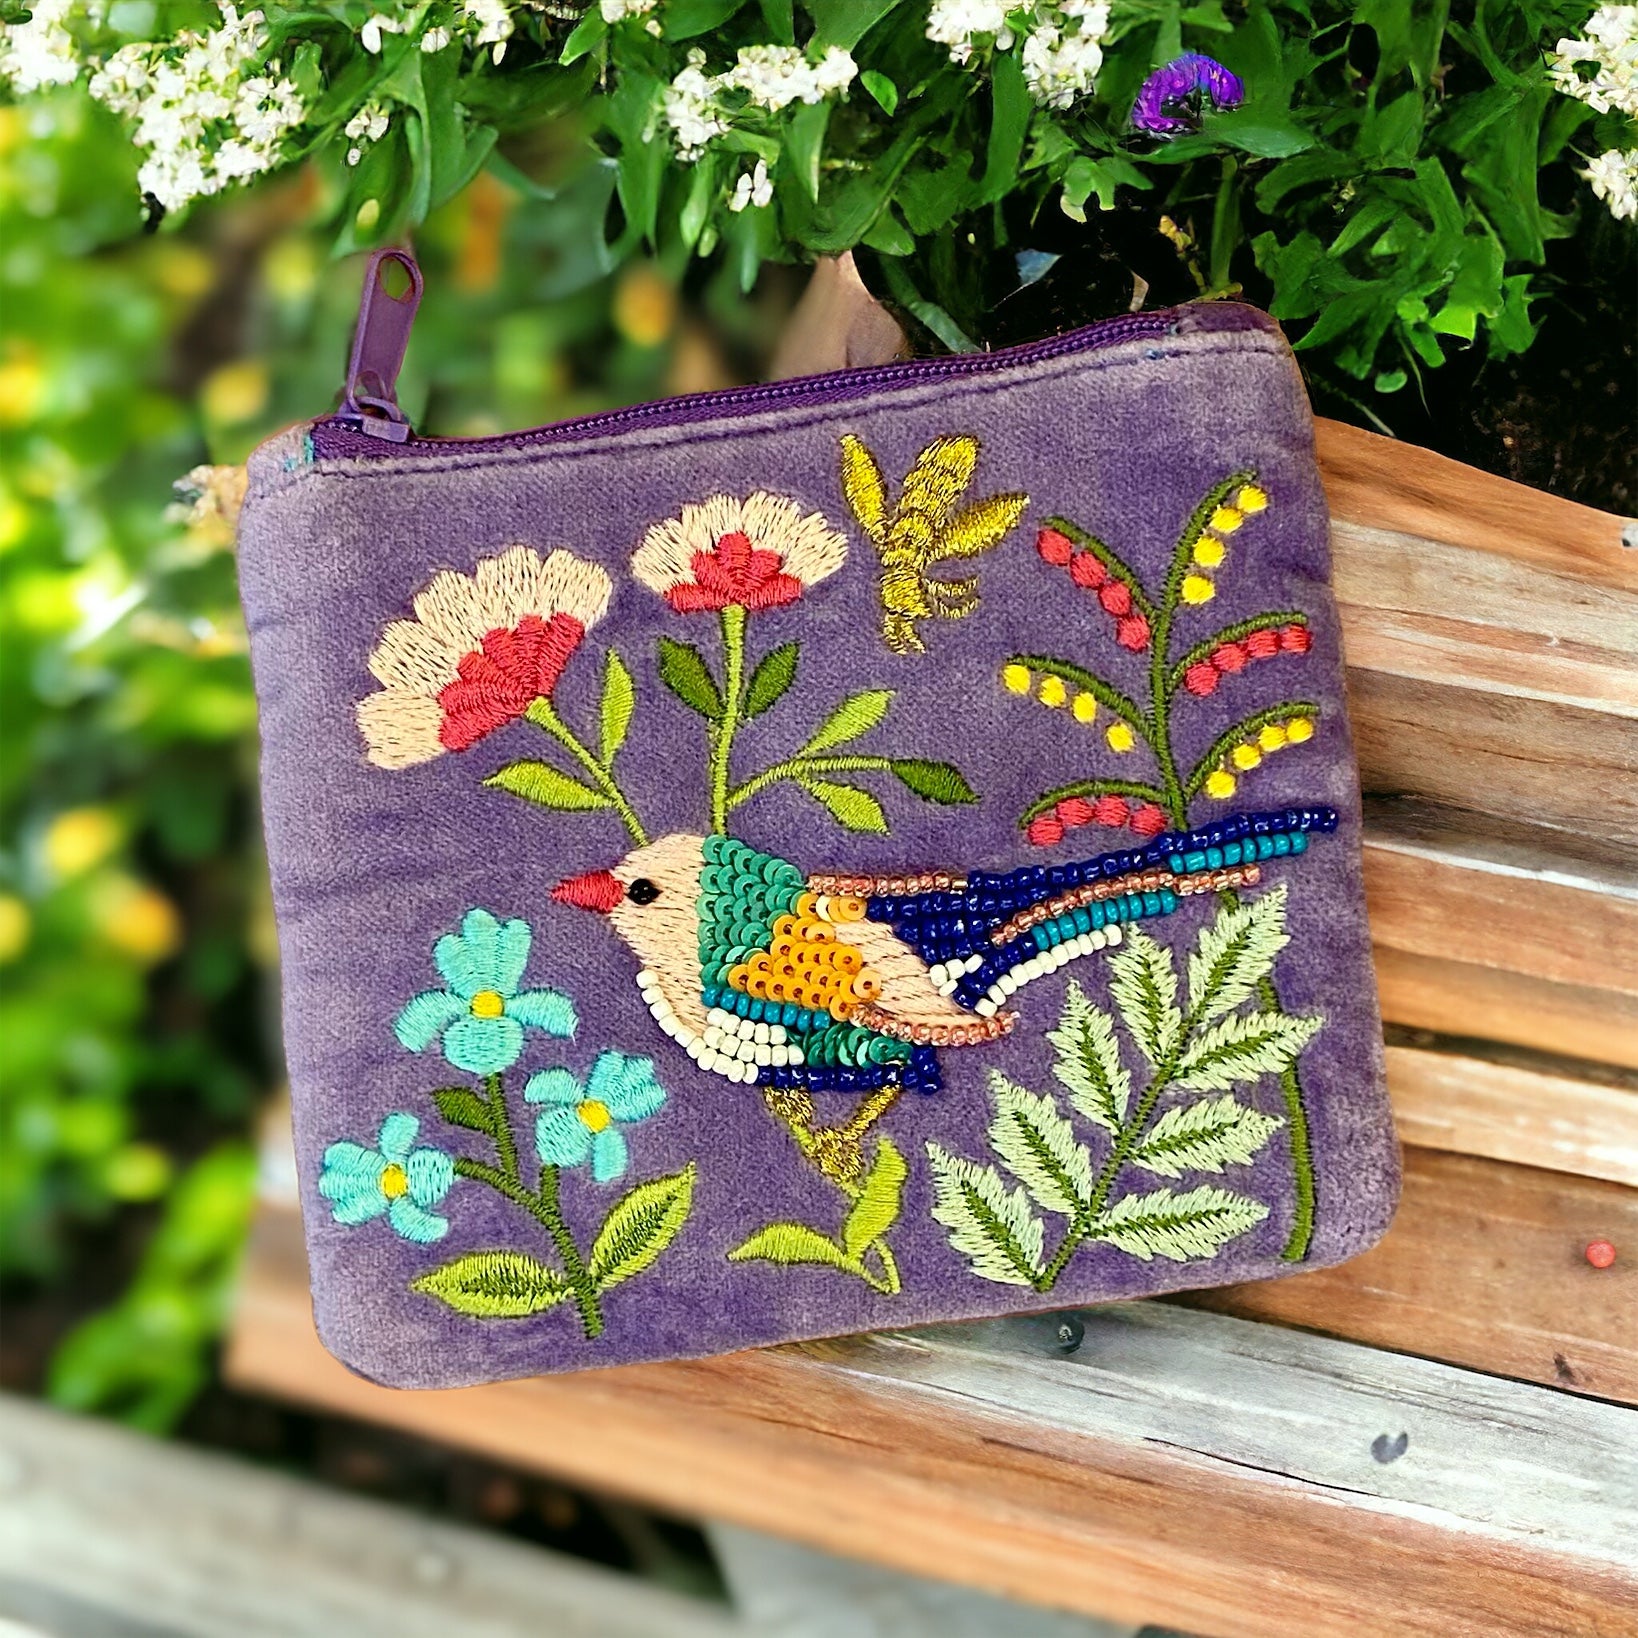 The Beaded Garden Bird and Flowers on Pale Lilac Cotton Velvet Purse